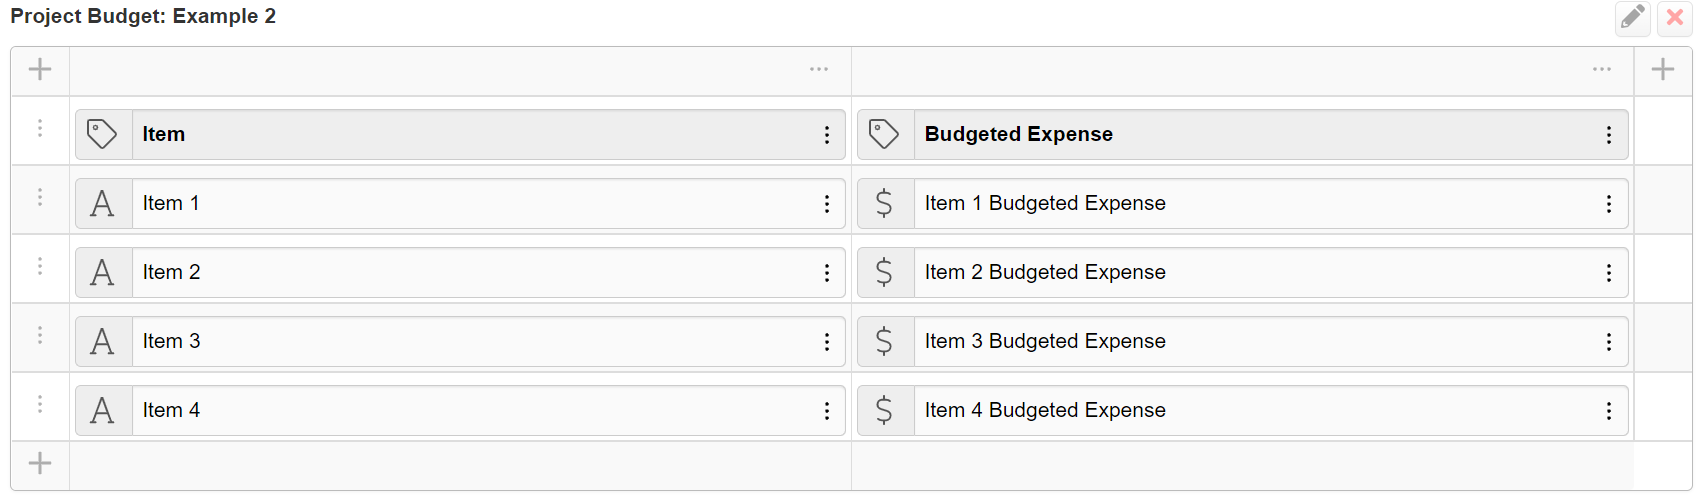 Image of a project budget table without defined rows